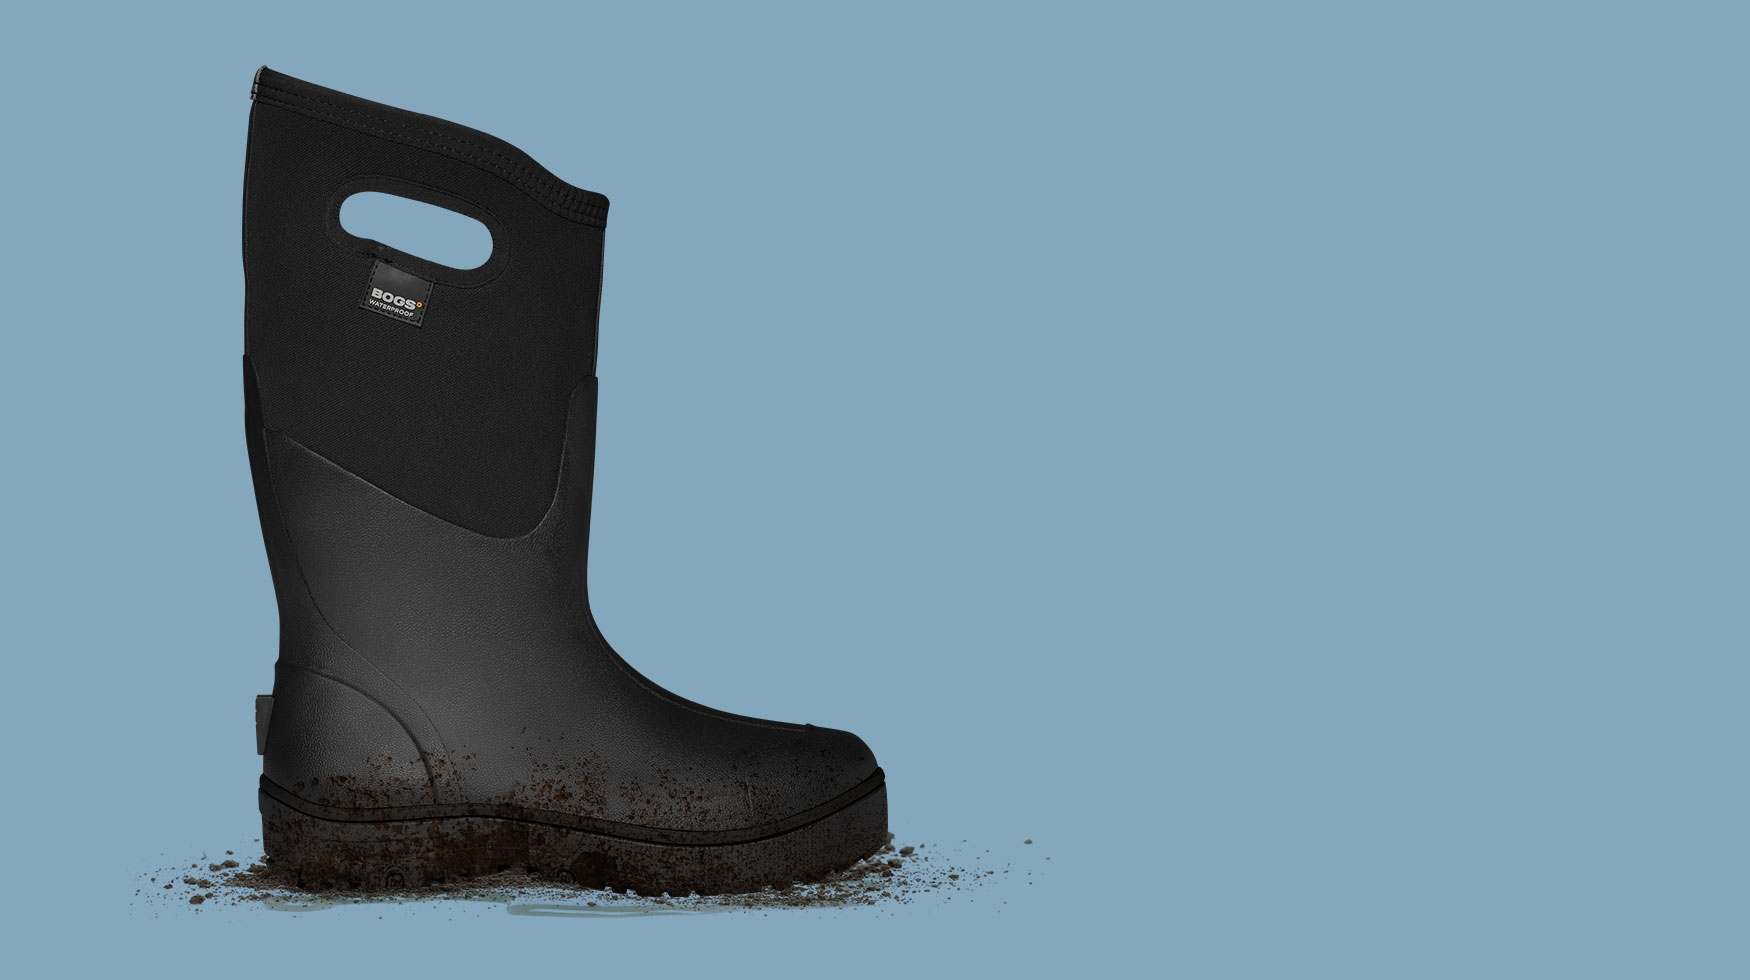 Shop the Men's Rancher waterproof work and farm boots. The featured product is the Men's Rancher in Black